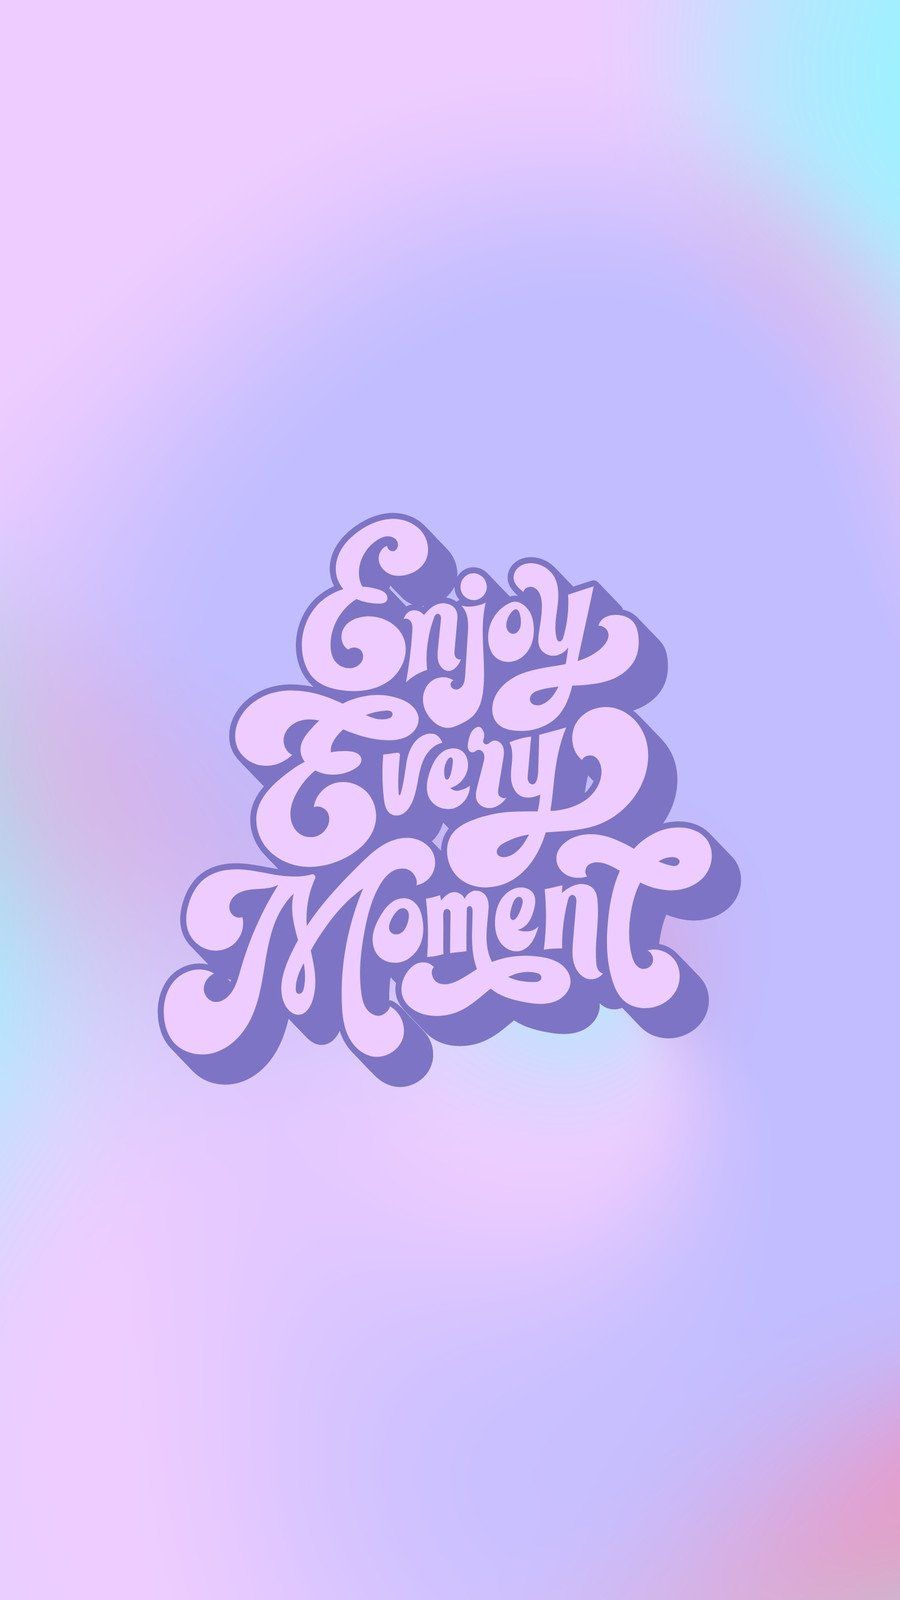 Enjoy every moment phone wallpaper - Purple quotes, retro, pink collage, vintage, colorful